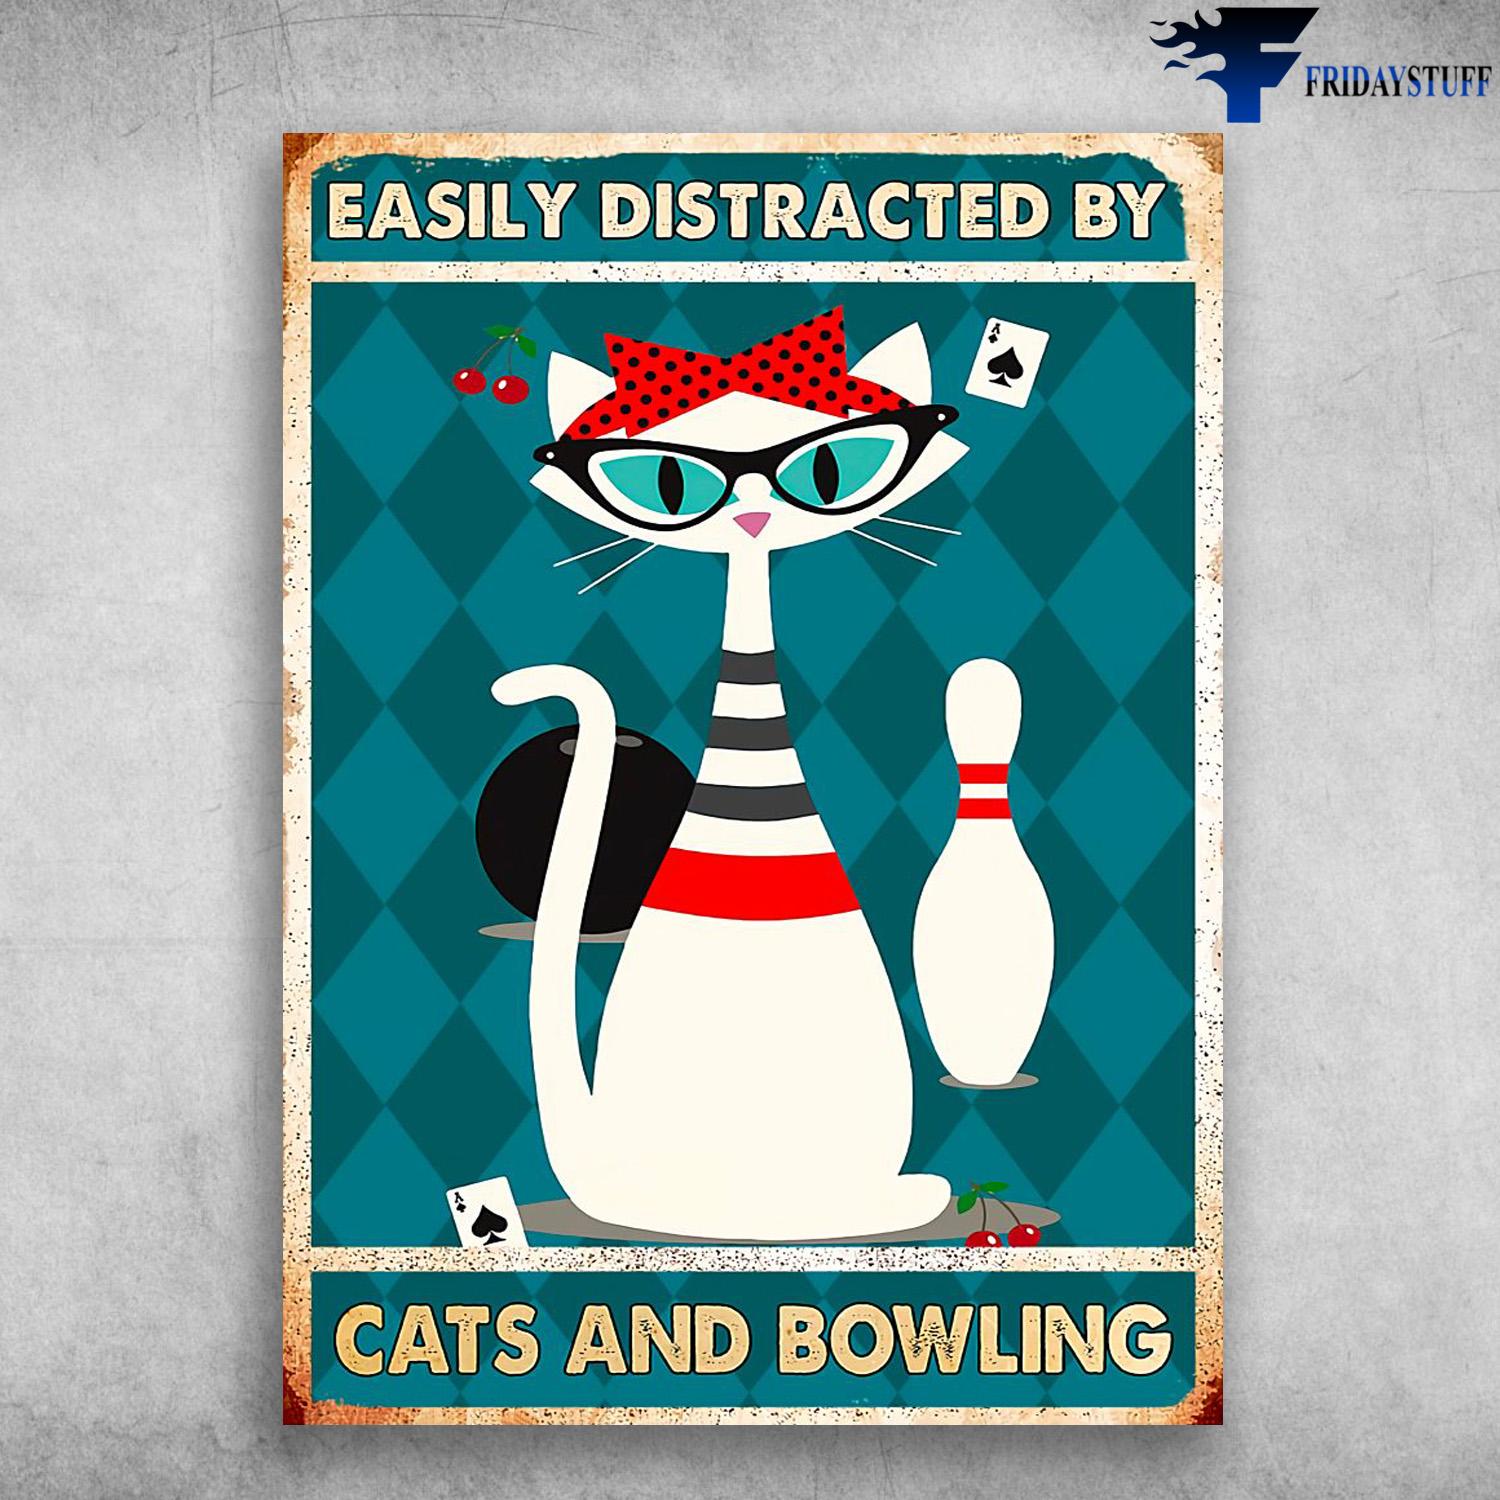 Cat Plays Bowling, Bowling Poster, Easily Distracted By, Cats And Bowling